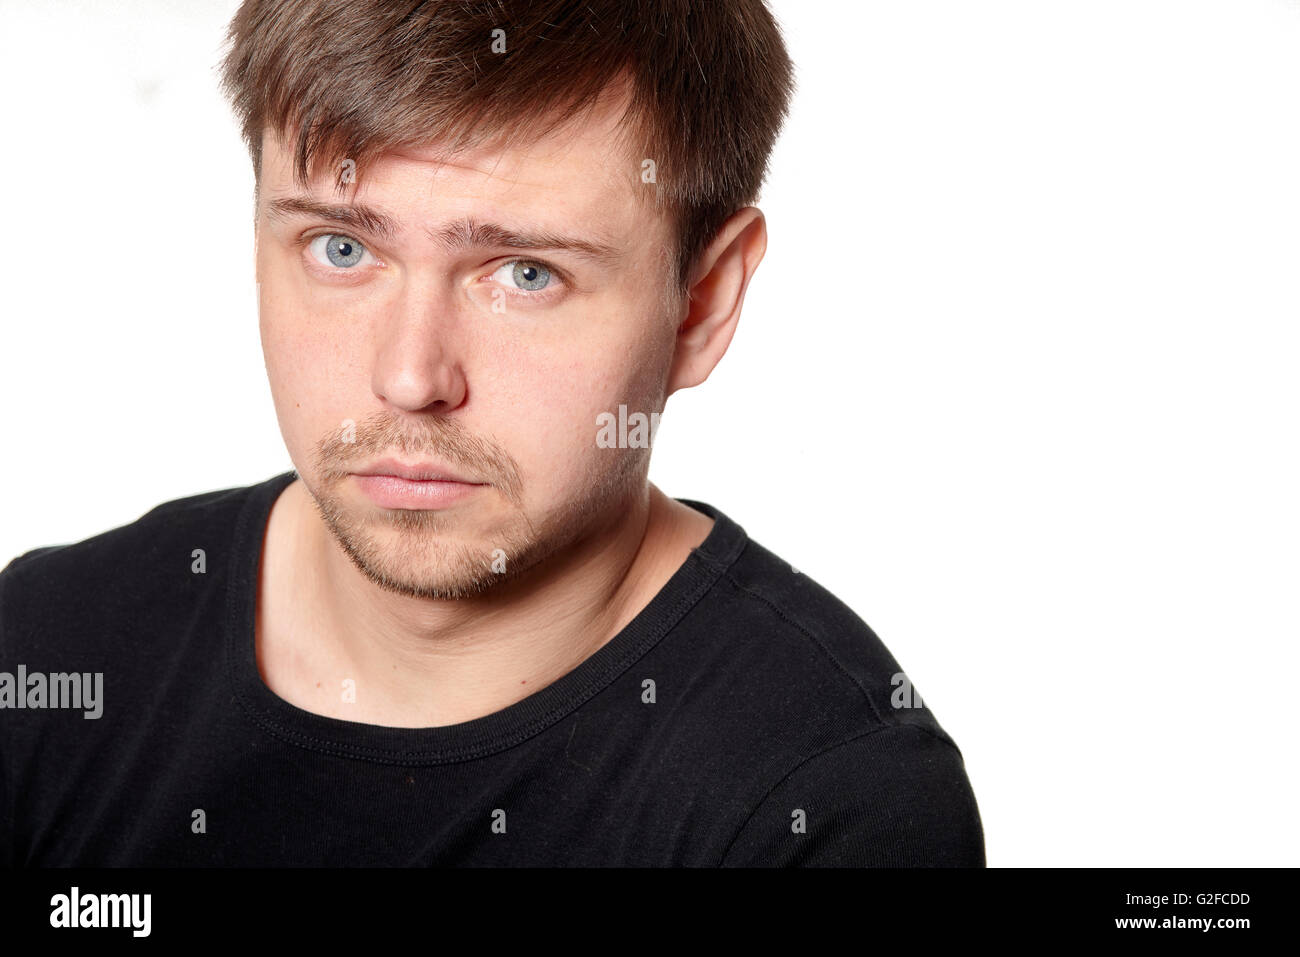 Serious young man, questioning expression,horizontal  on white background with space for text Stock Photo